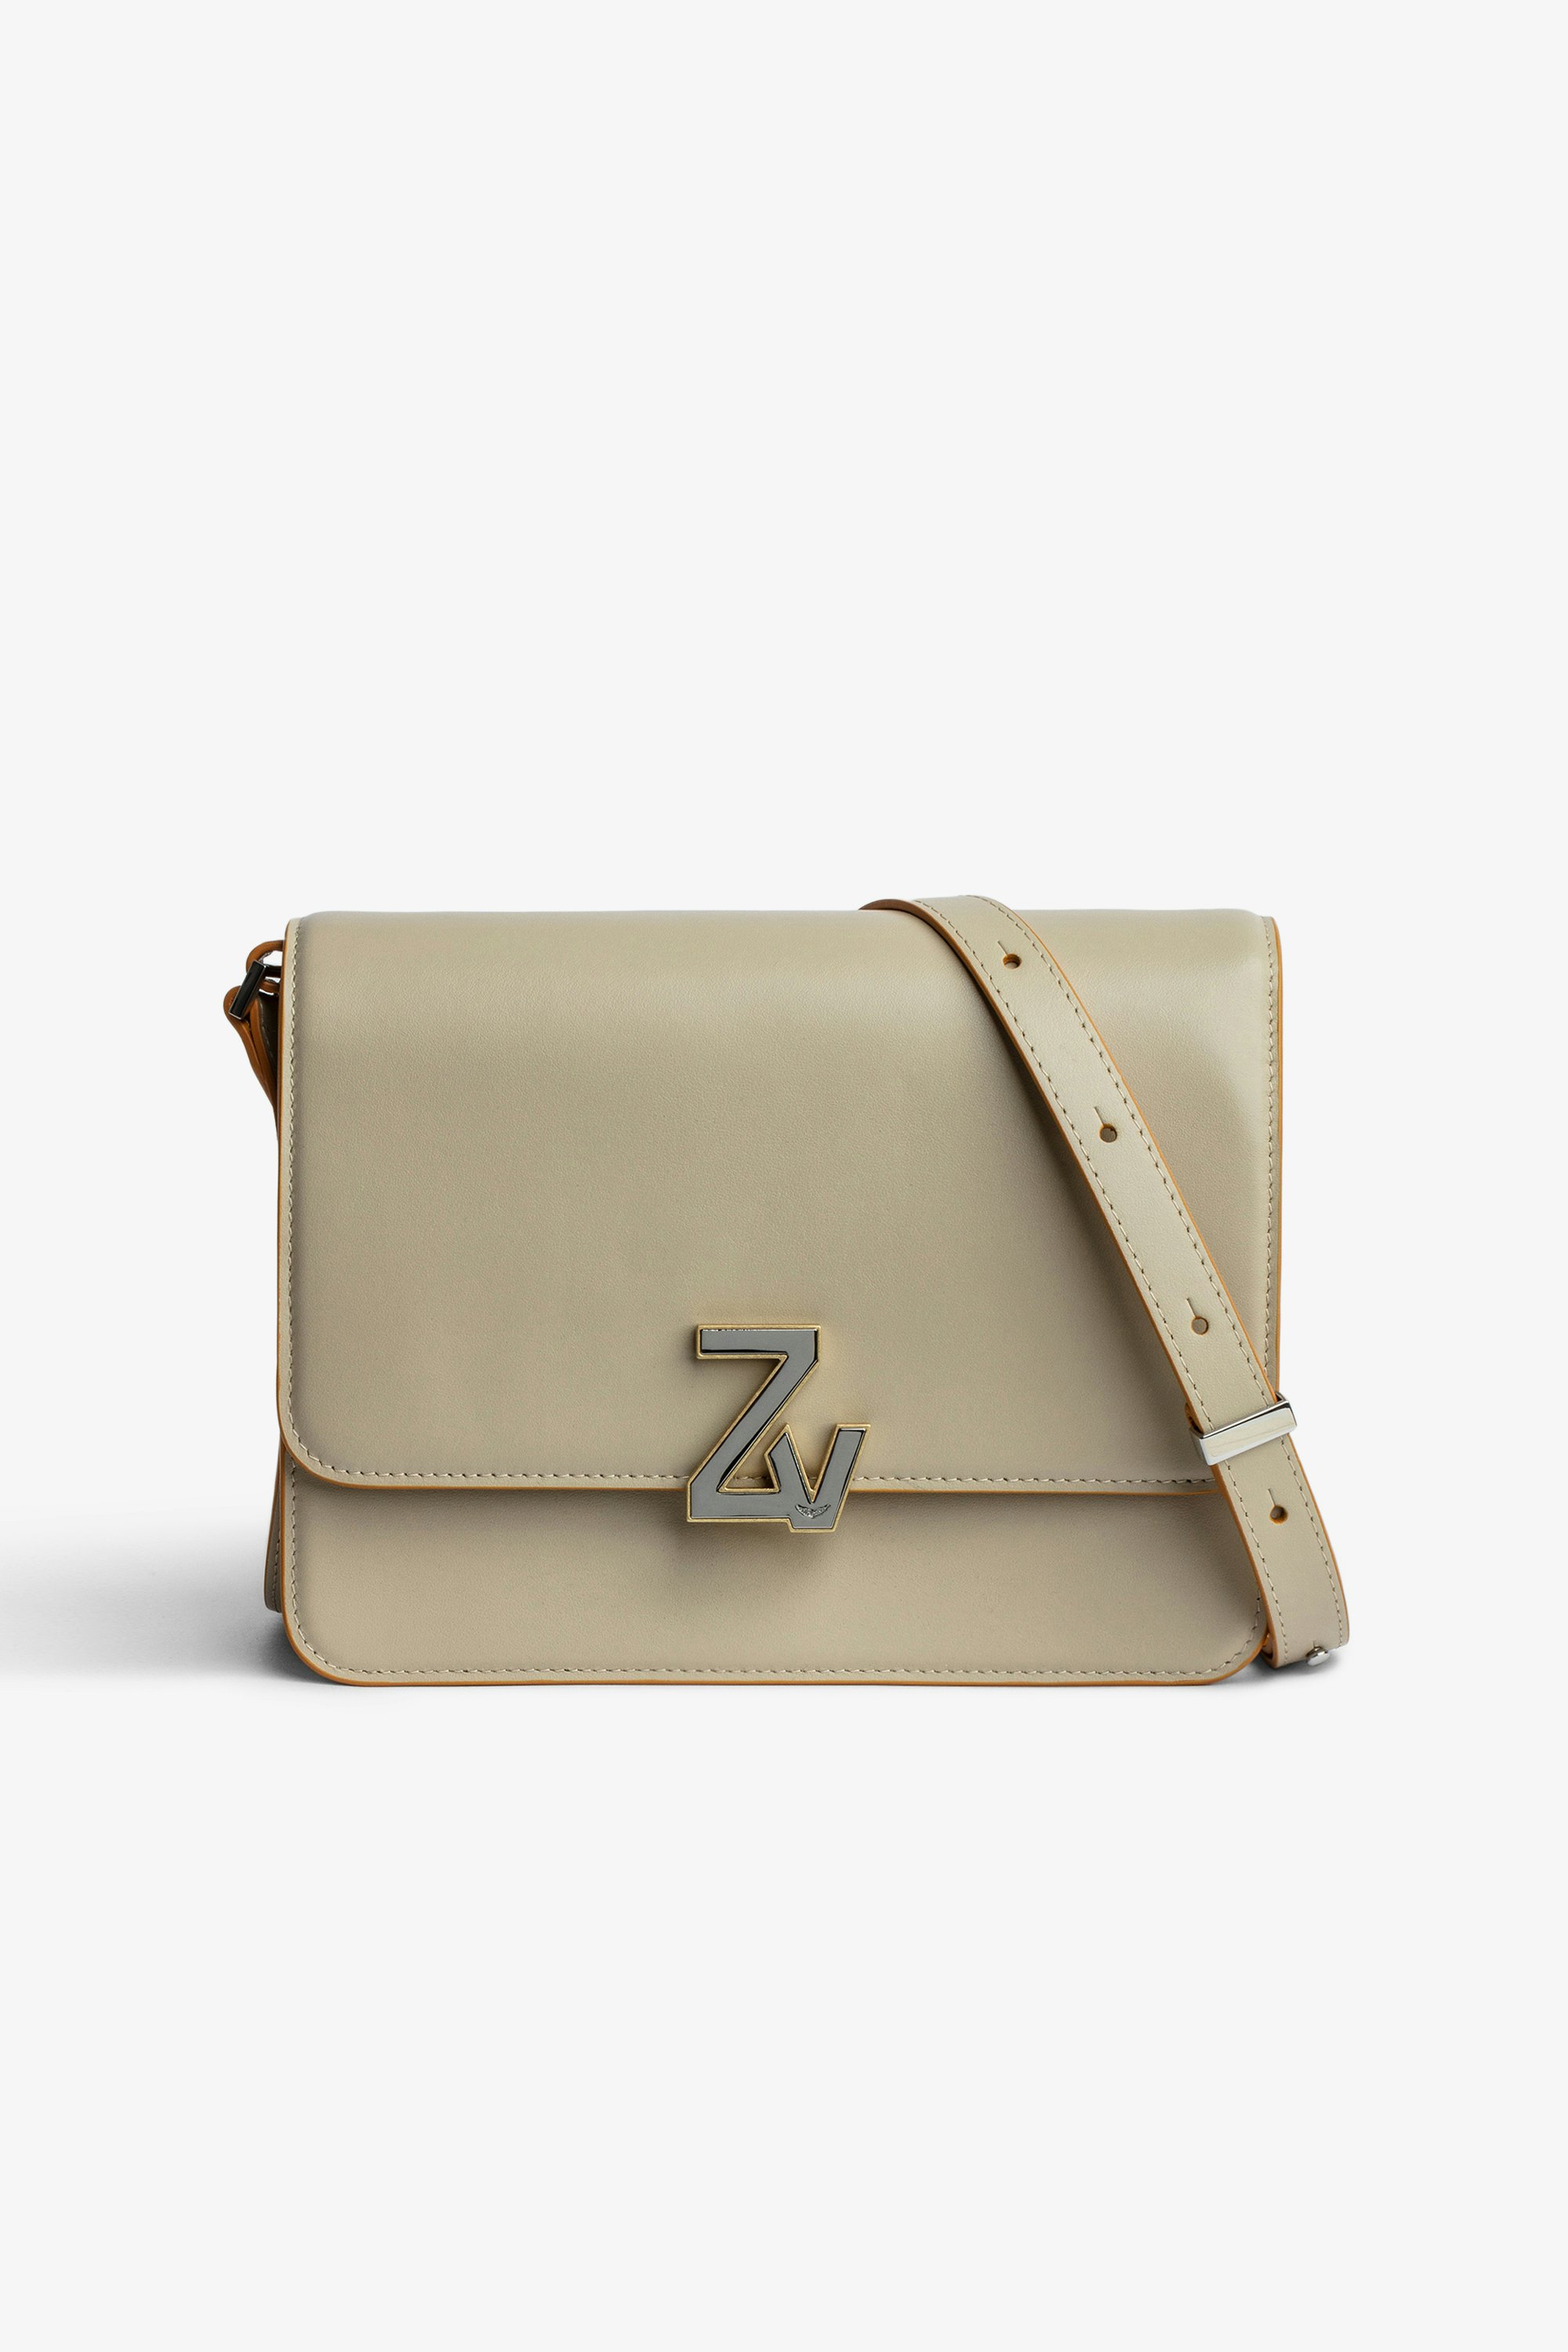 ZV Initiale Le City Bag Women’s smooth beige leather bag with flap, ZV clasp and a shoulder strap